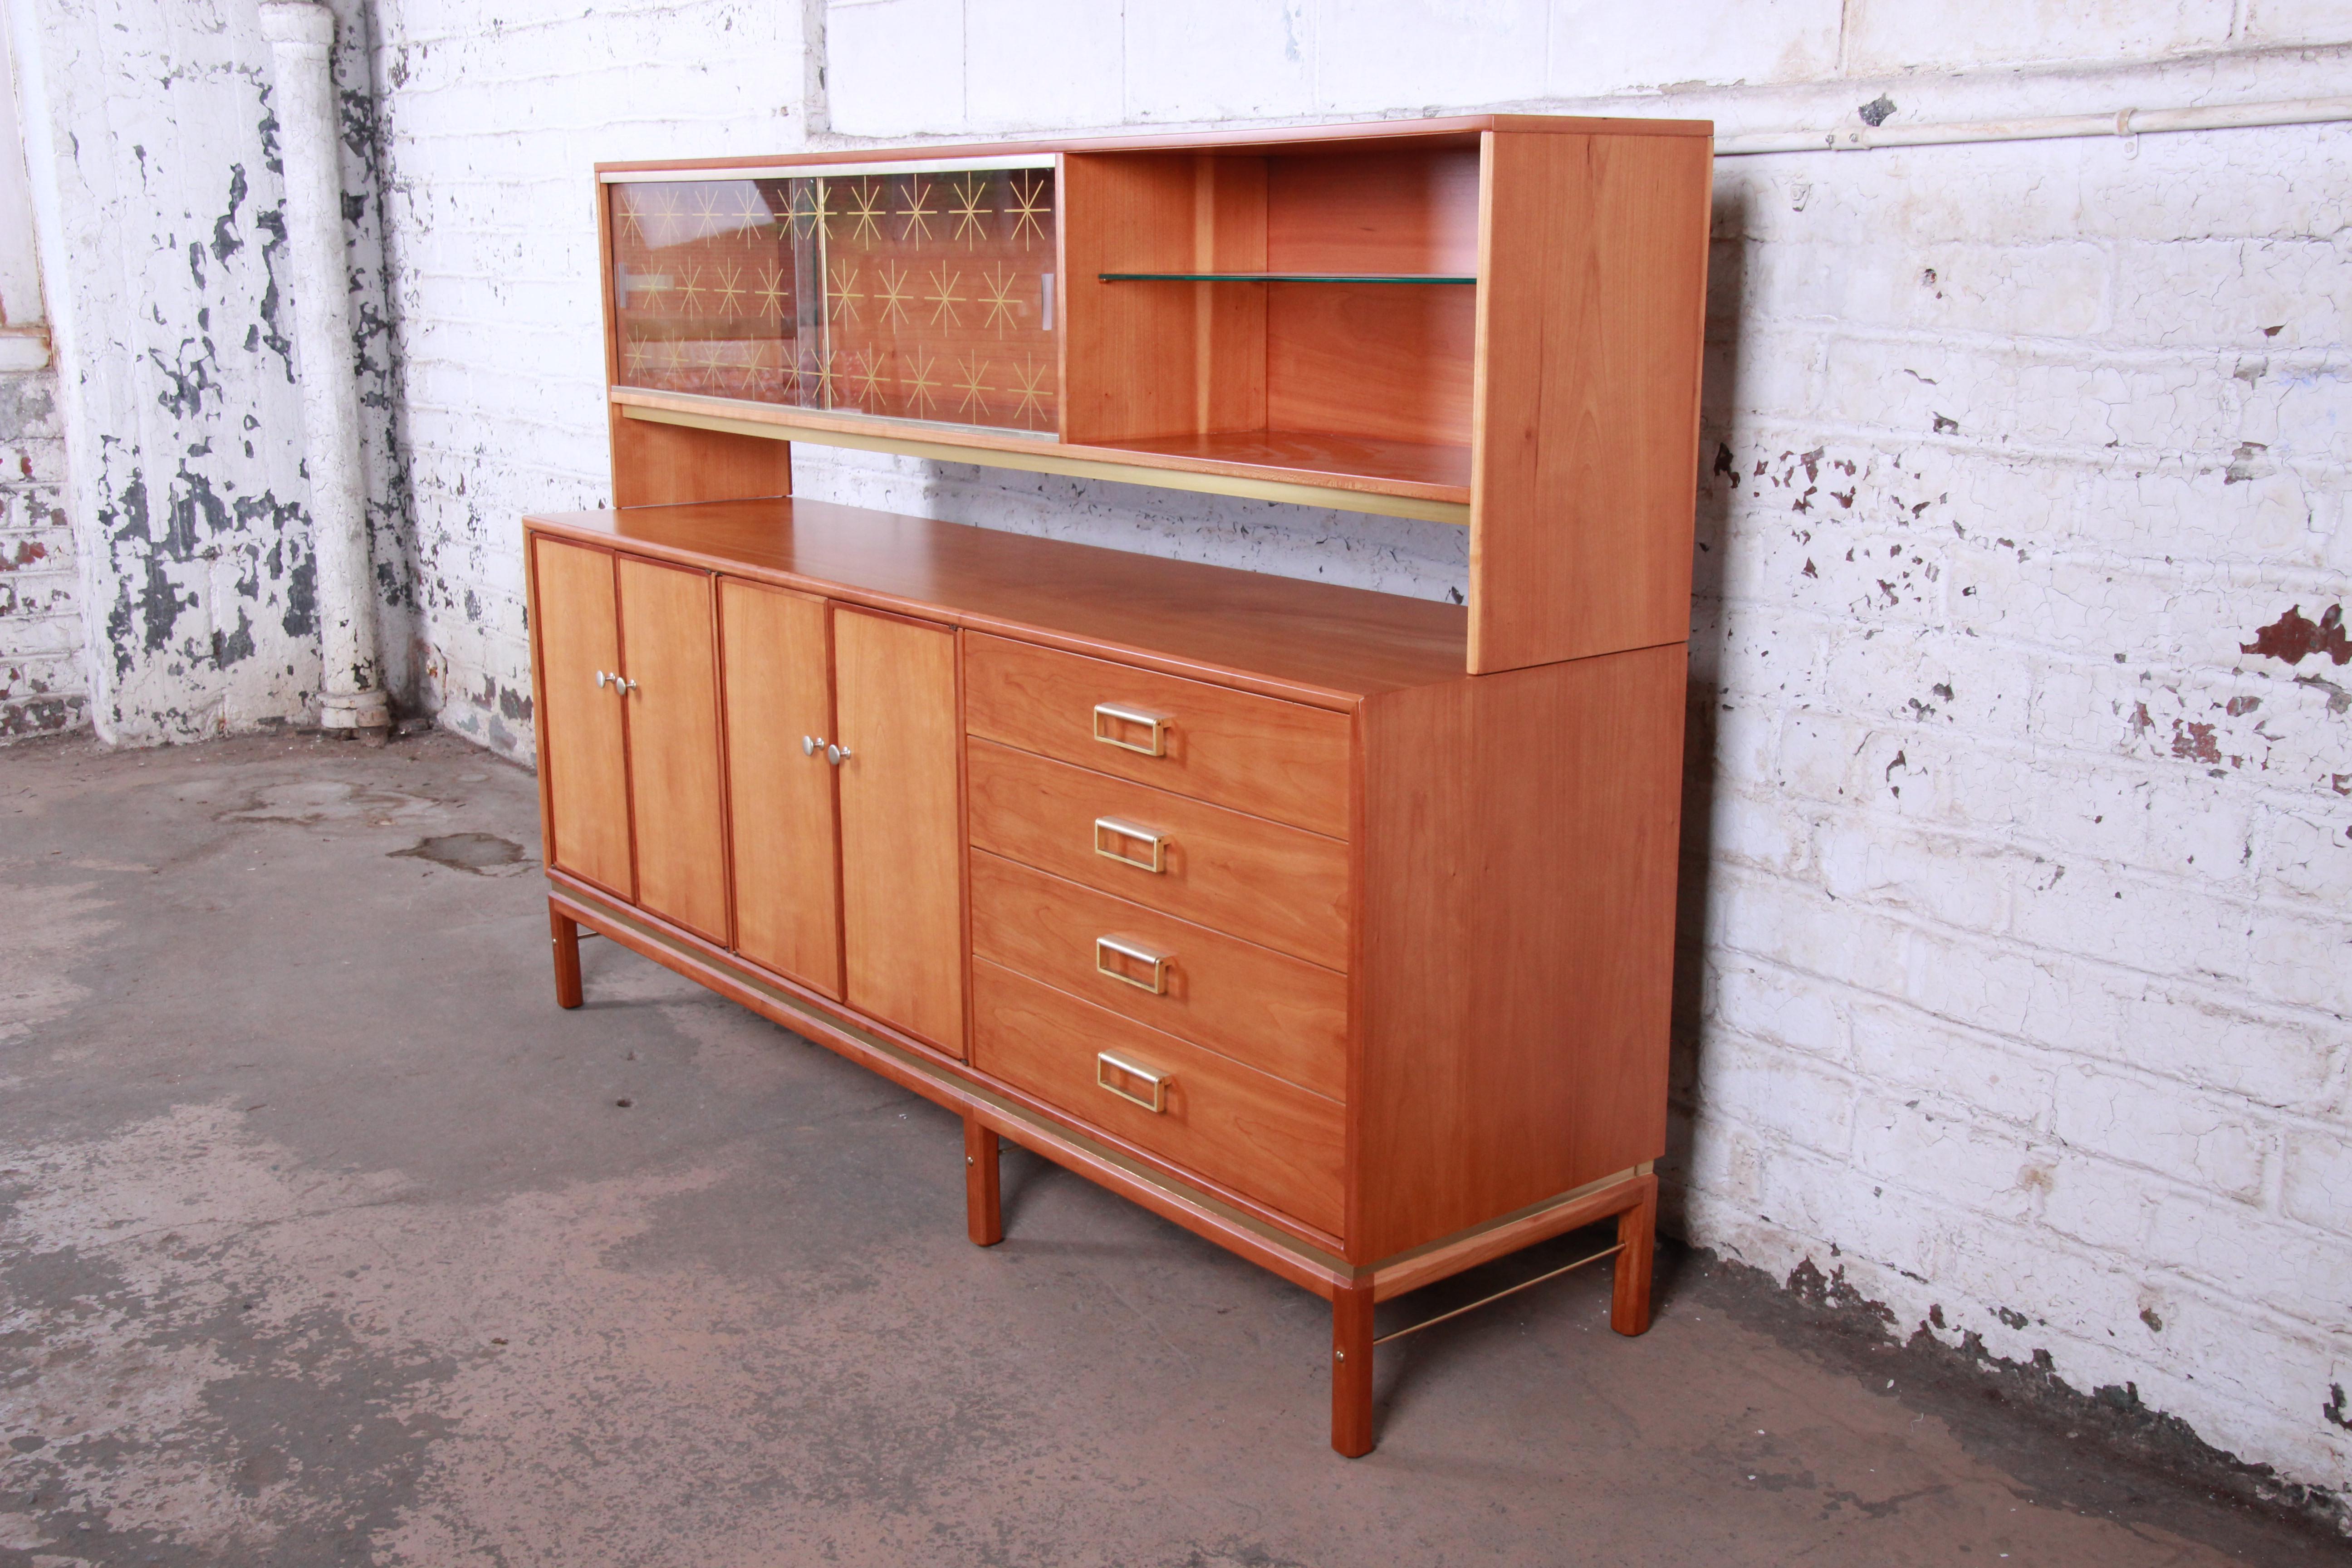 An exceptional Mid-Century Modern sideboard with hutch top designed by Kipp Stewart for his Sun Coast line for Drexel Furniture. The sideboard features stunning cherrywood grain and sleek midcentury design. It offers ample storage, with four